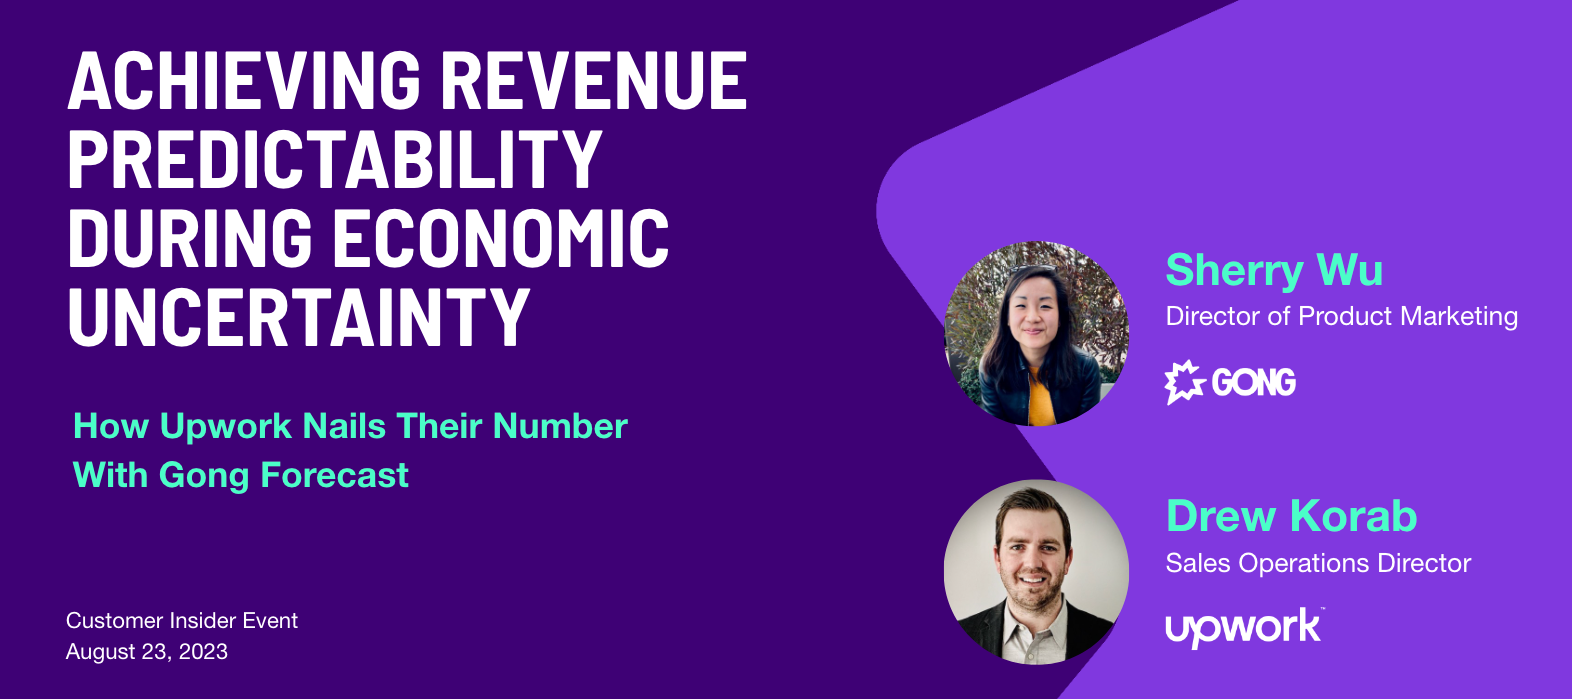 Tips from Achieving Revenue Predictability During Economic Uncertainty